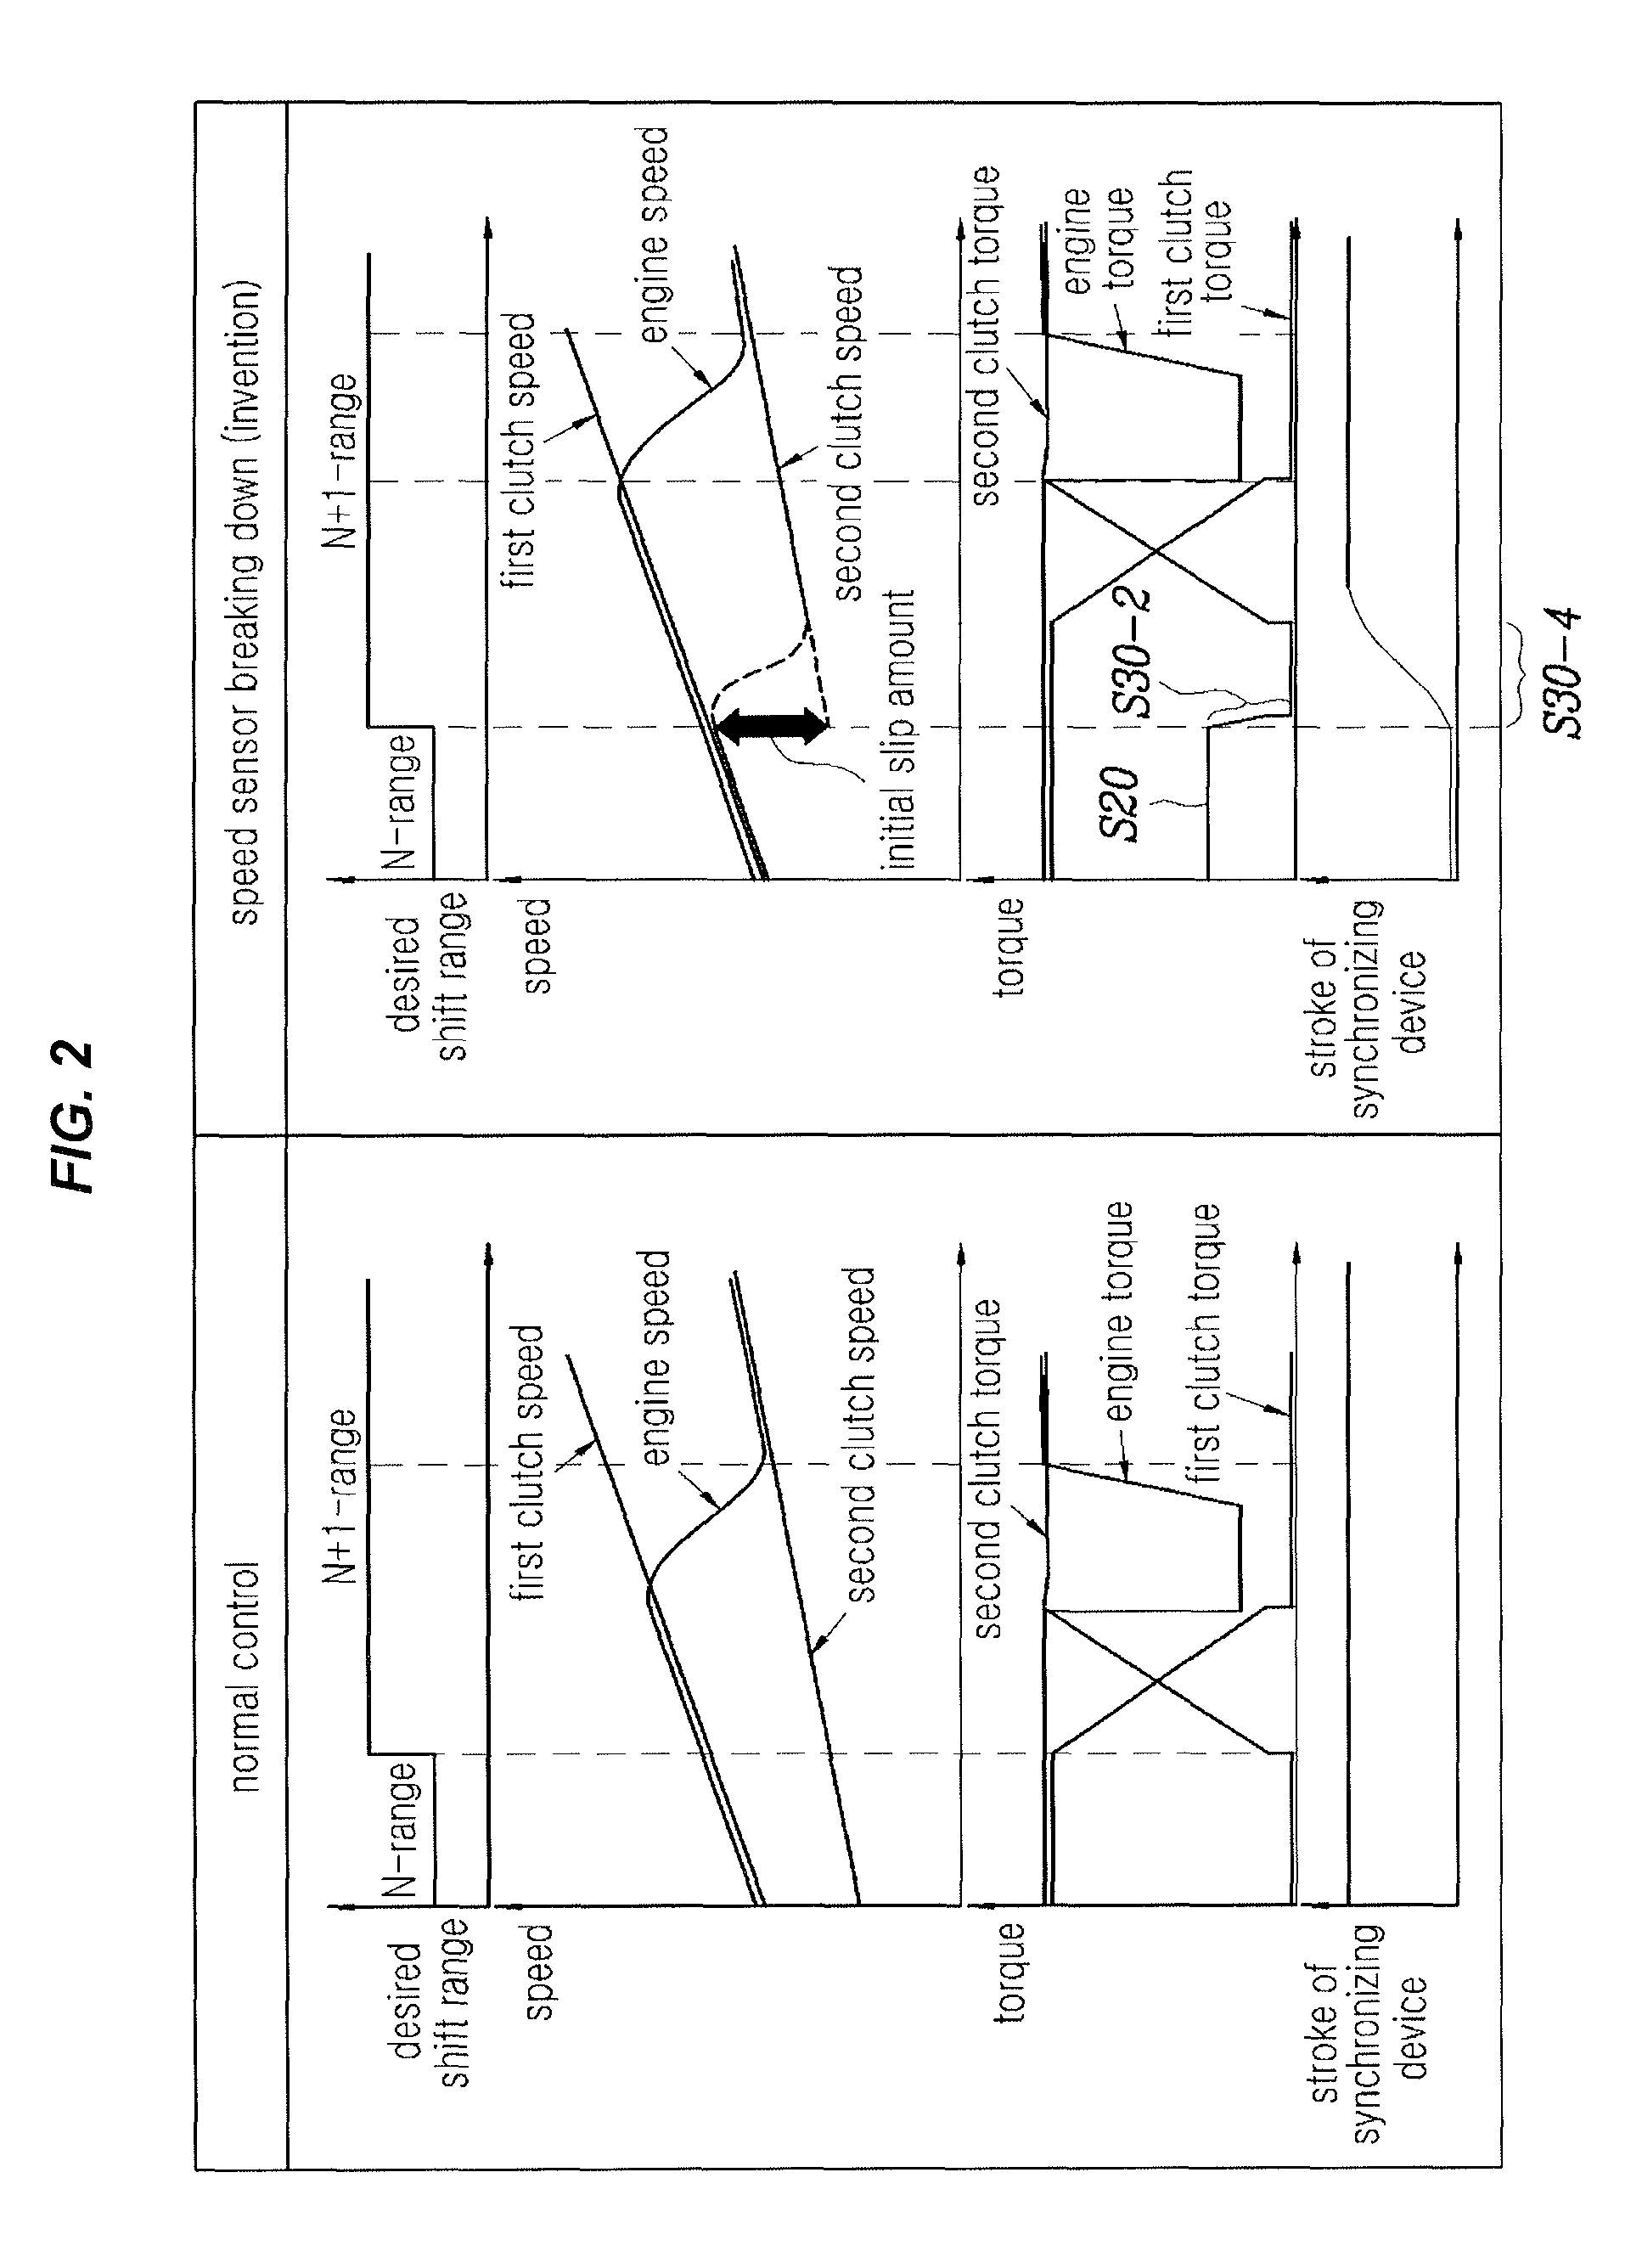 DCT control method for vehicle